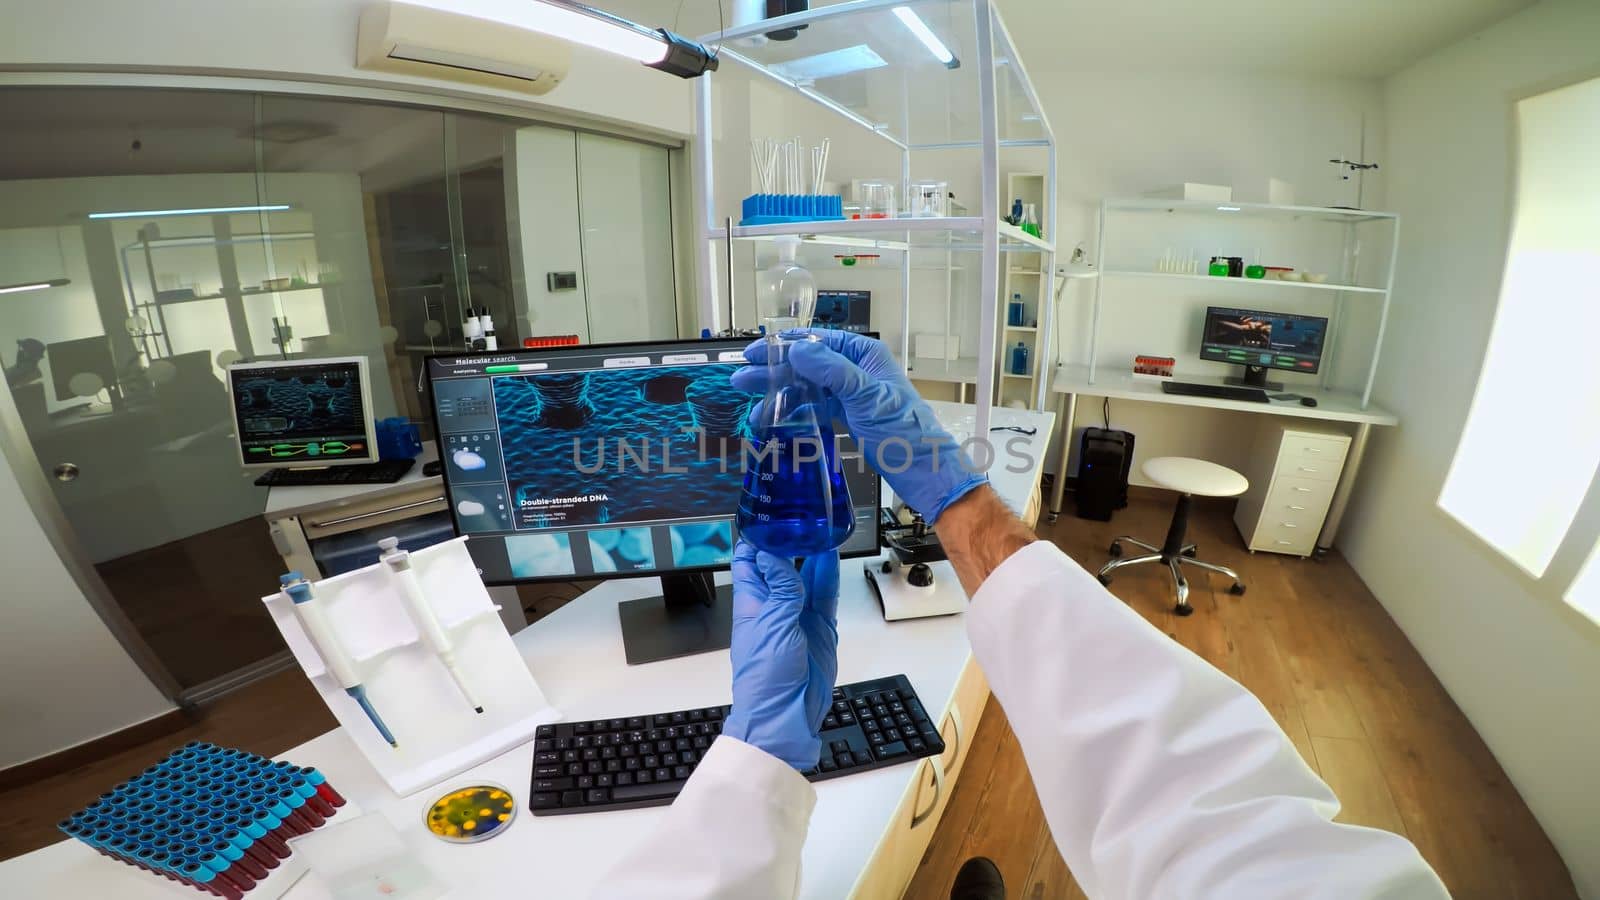 POV of medical scientist working with DNA scan image in modern equipped lab holding test tube with sample. Team examining vaccine evolution using high tech and chemistry tools for vaccine development